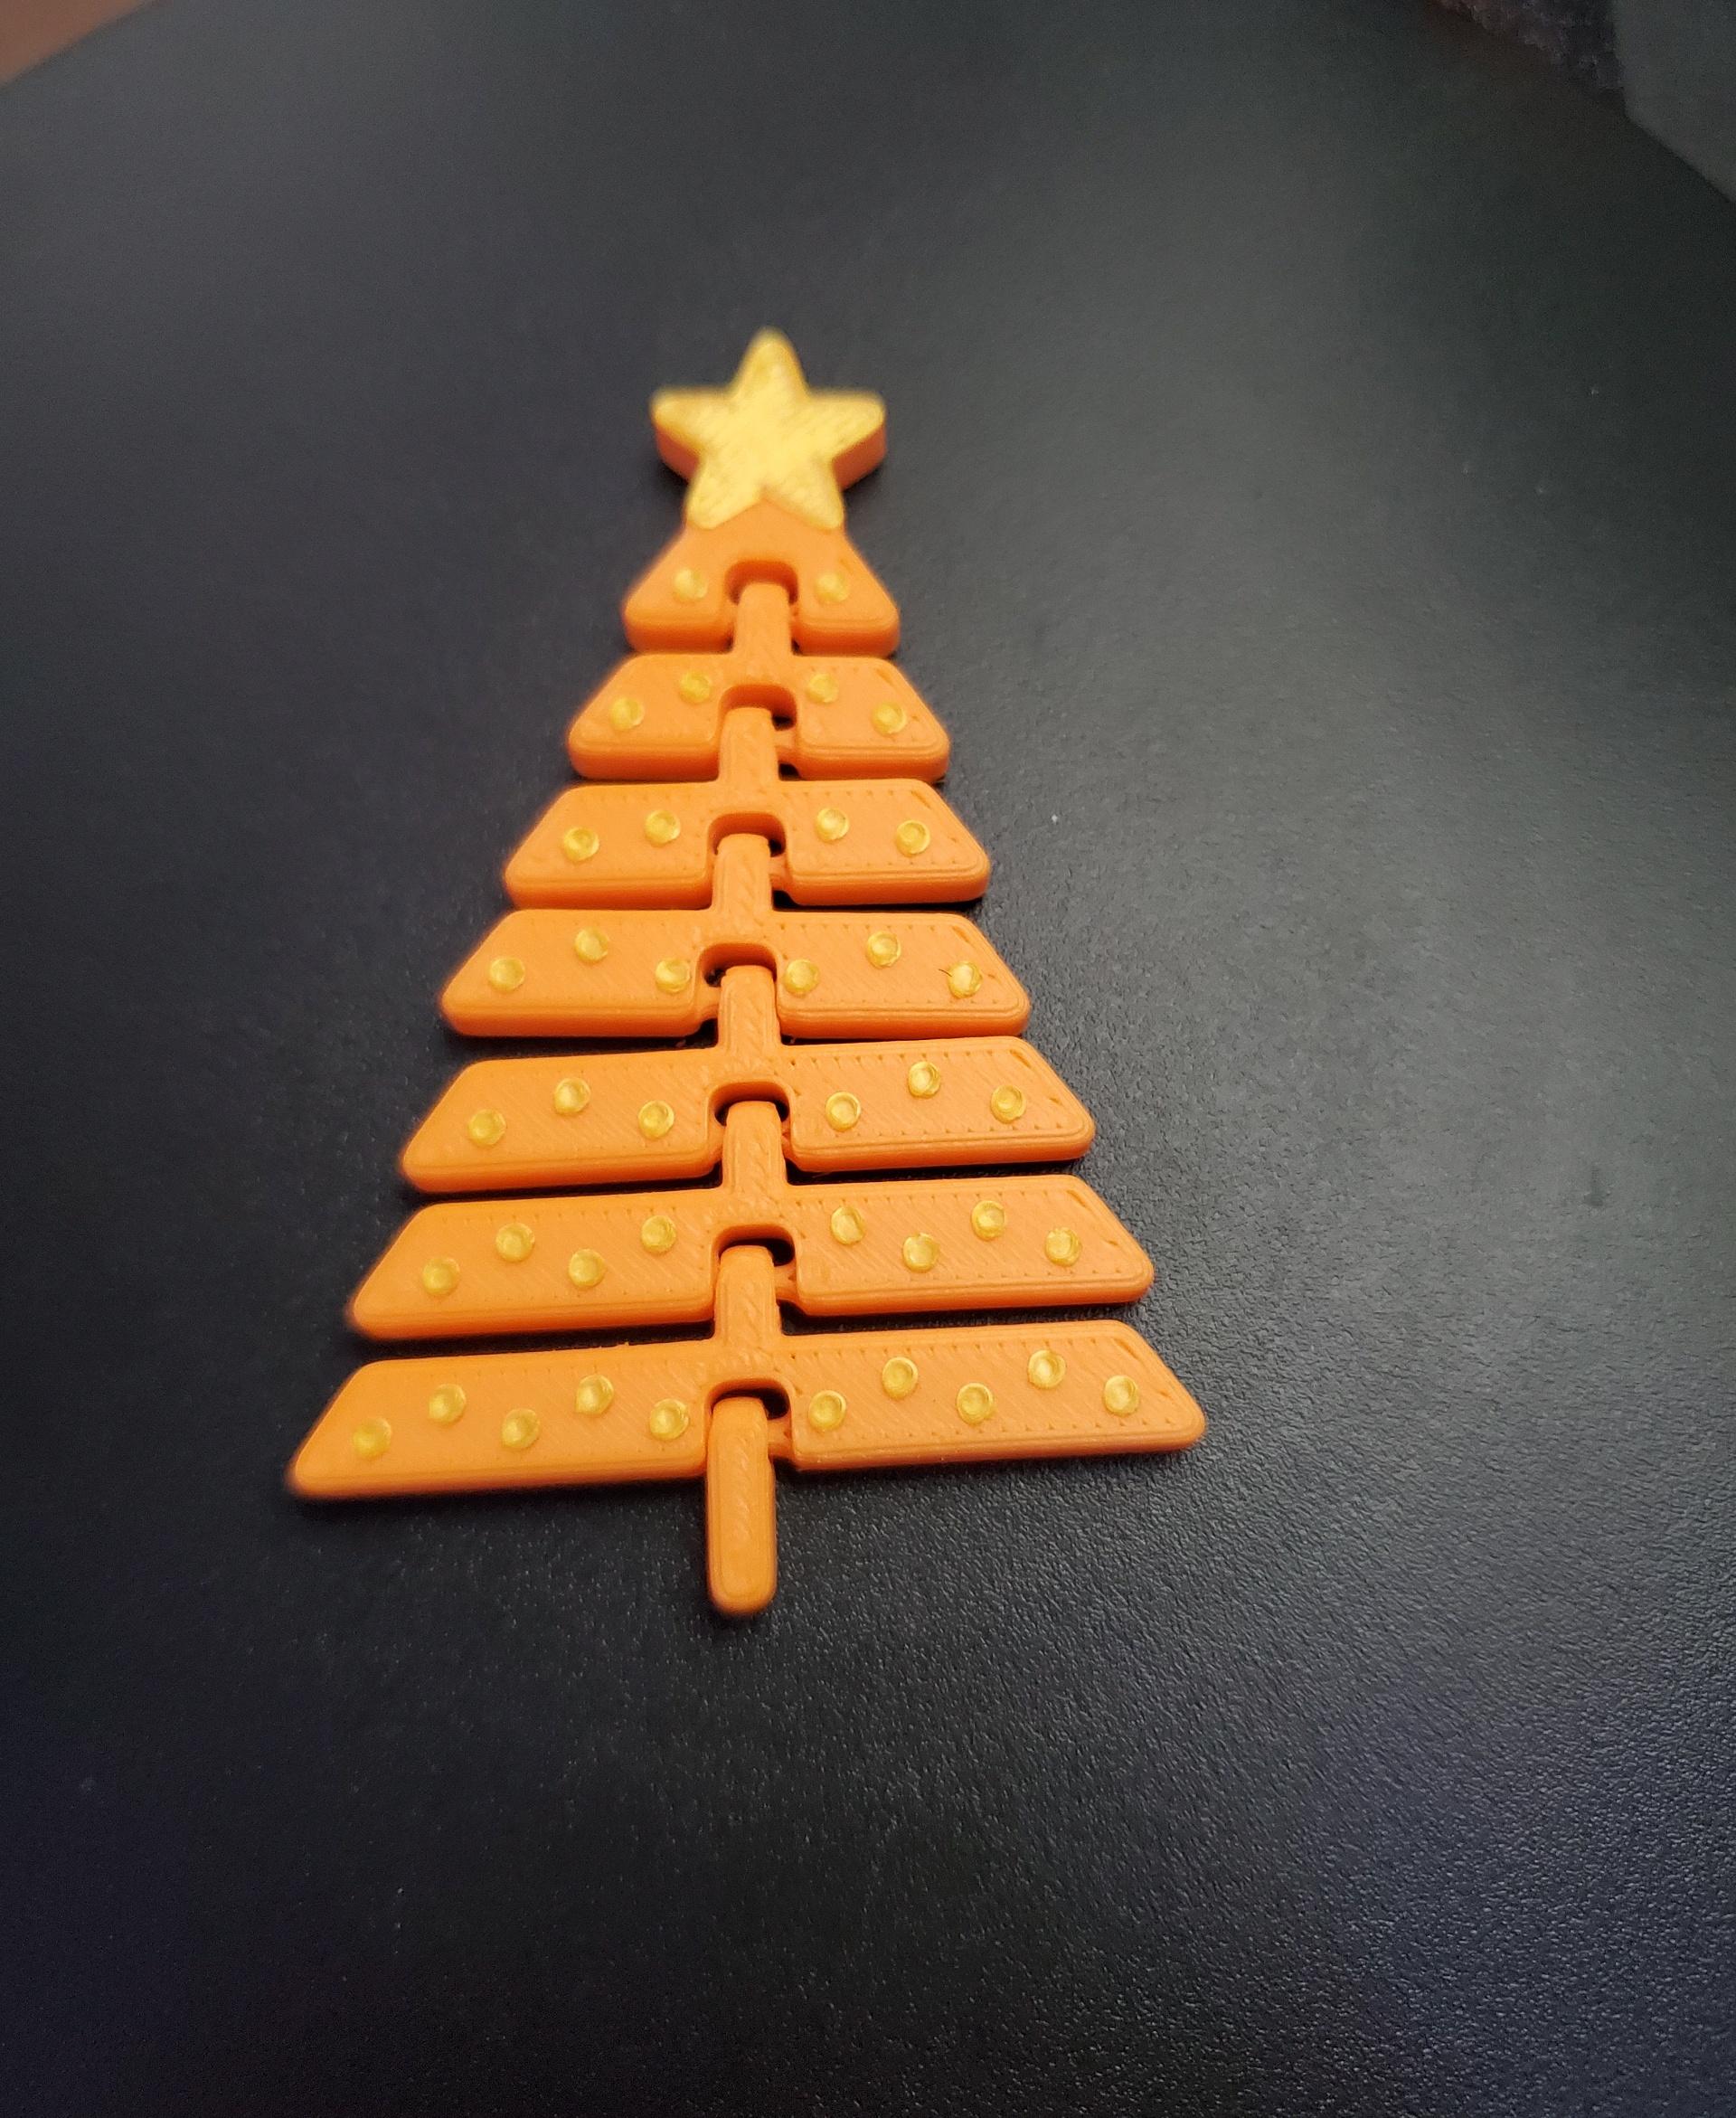 Articulated Christmas Tree with Star and Ornaments - Print in place fidget toys - 3mf - polyterra sunrise orange - 3d model